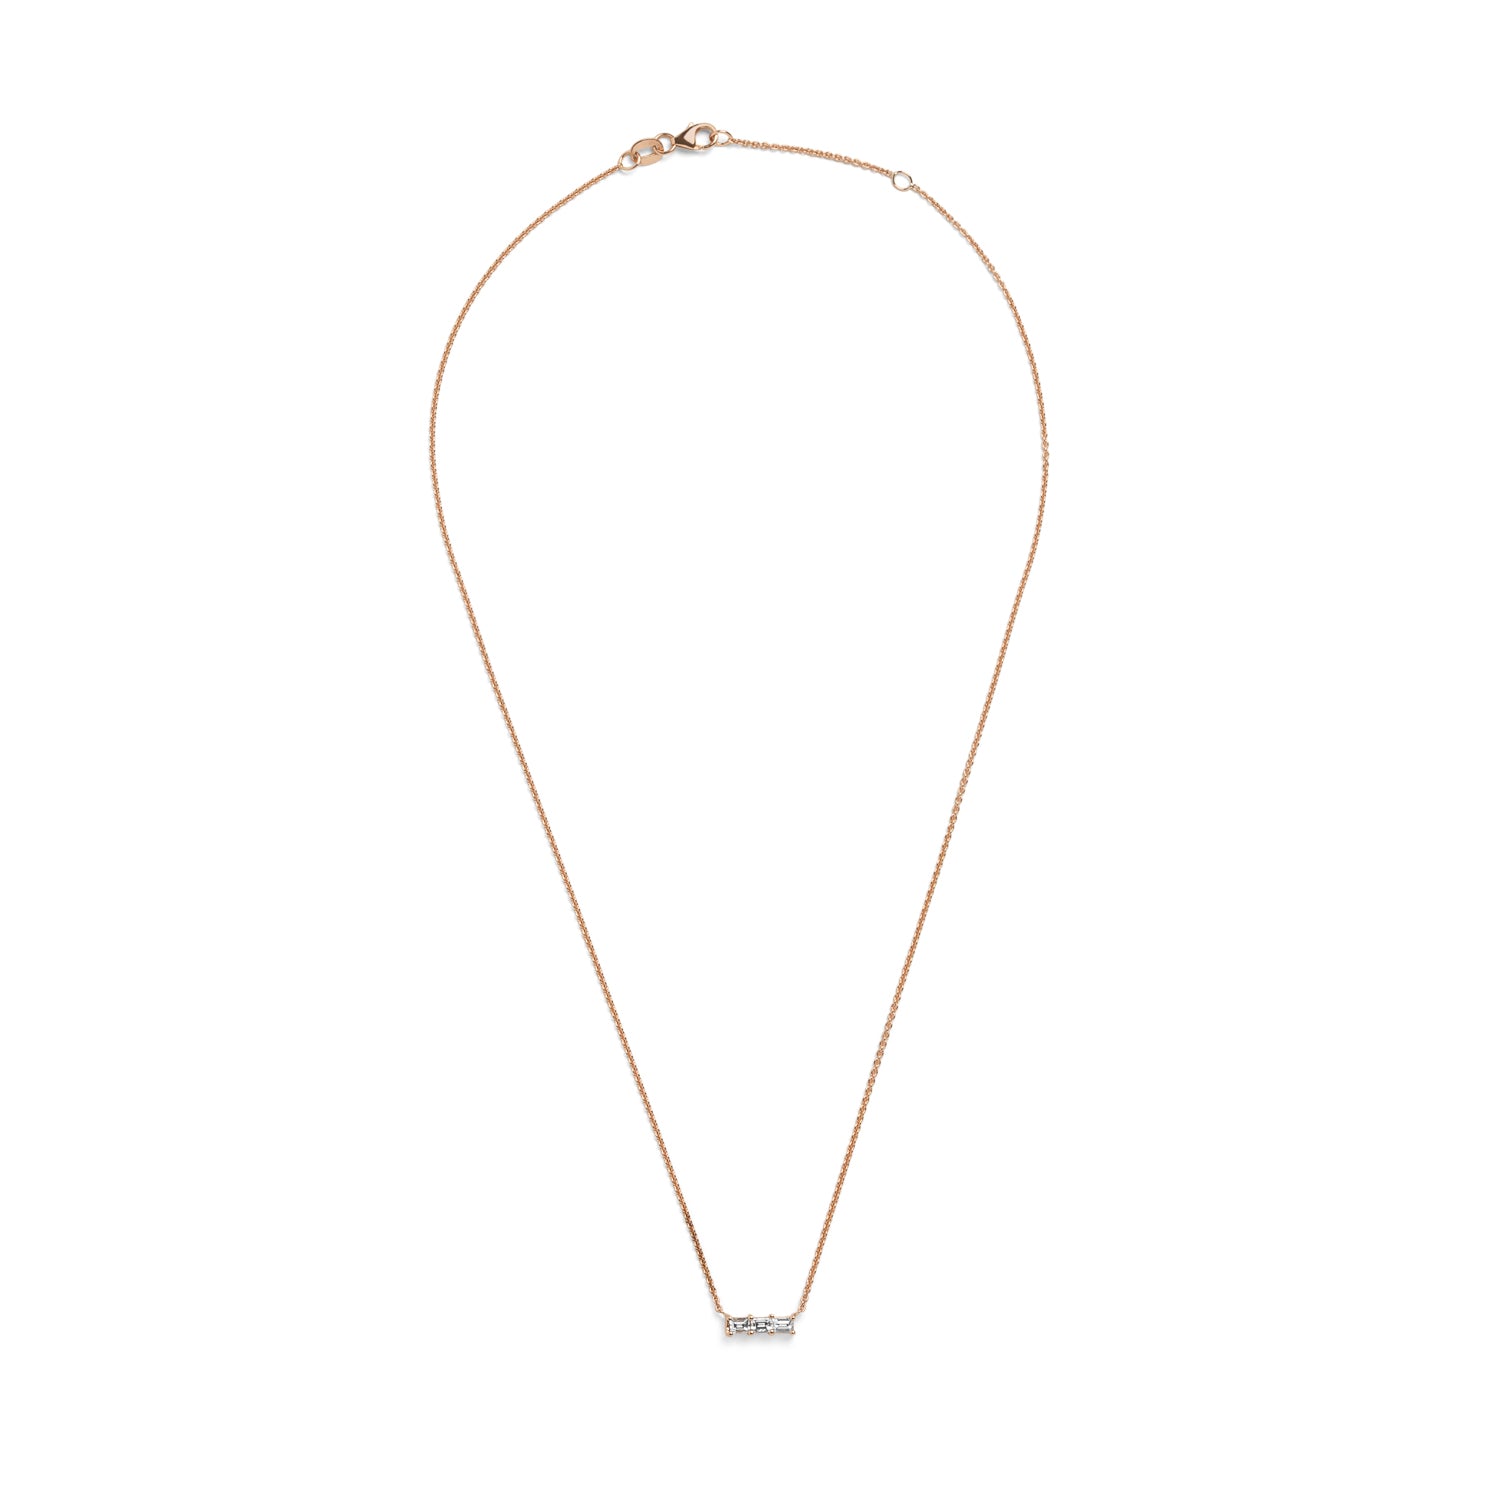 Selin Kent 14K Rhea Necklace with Three White Diamond Baguettes